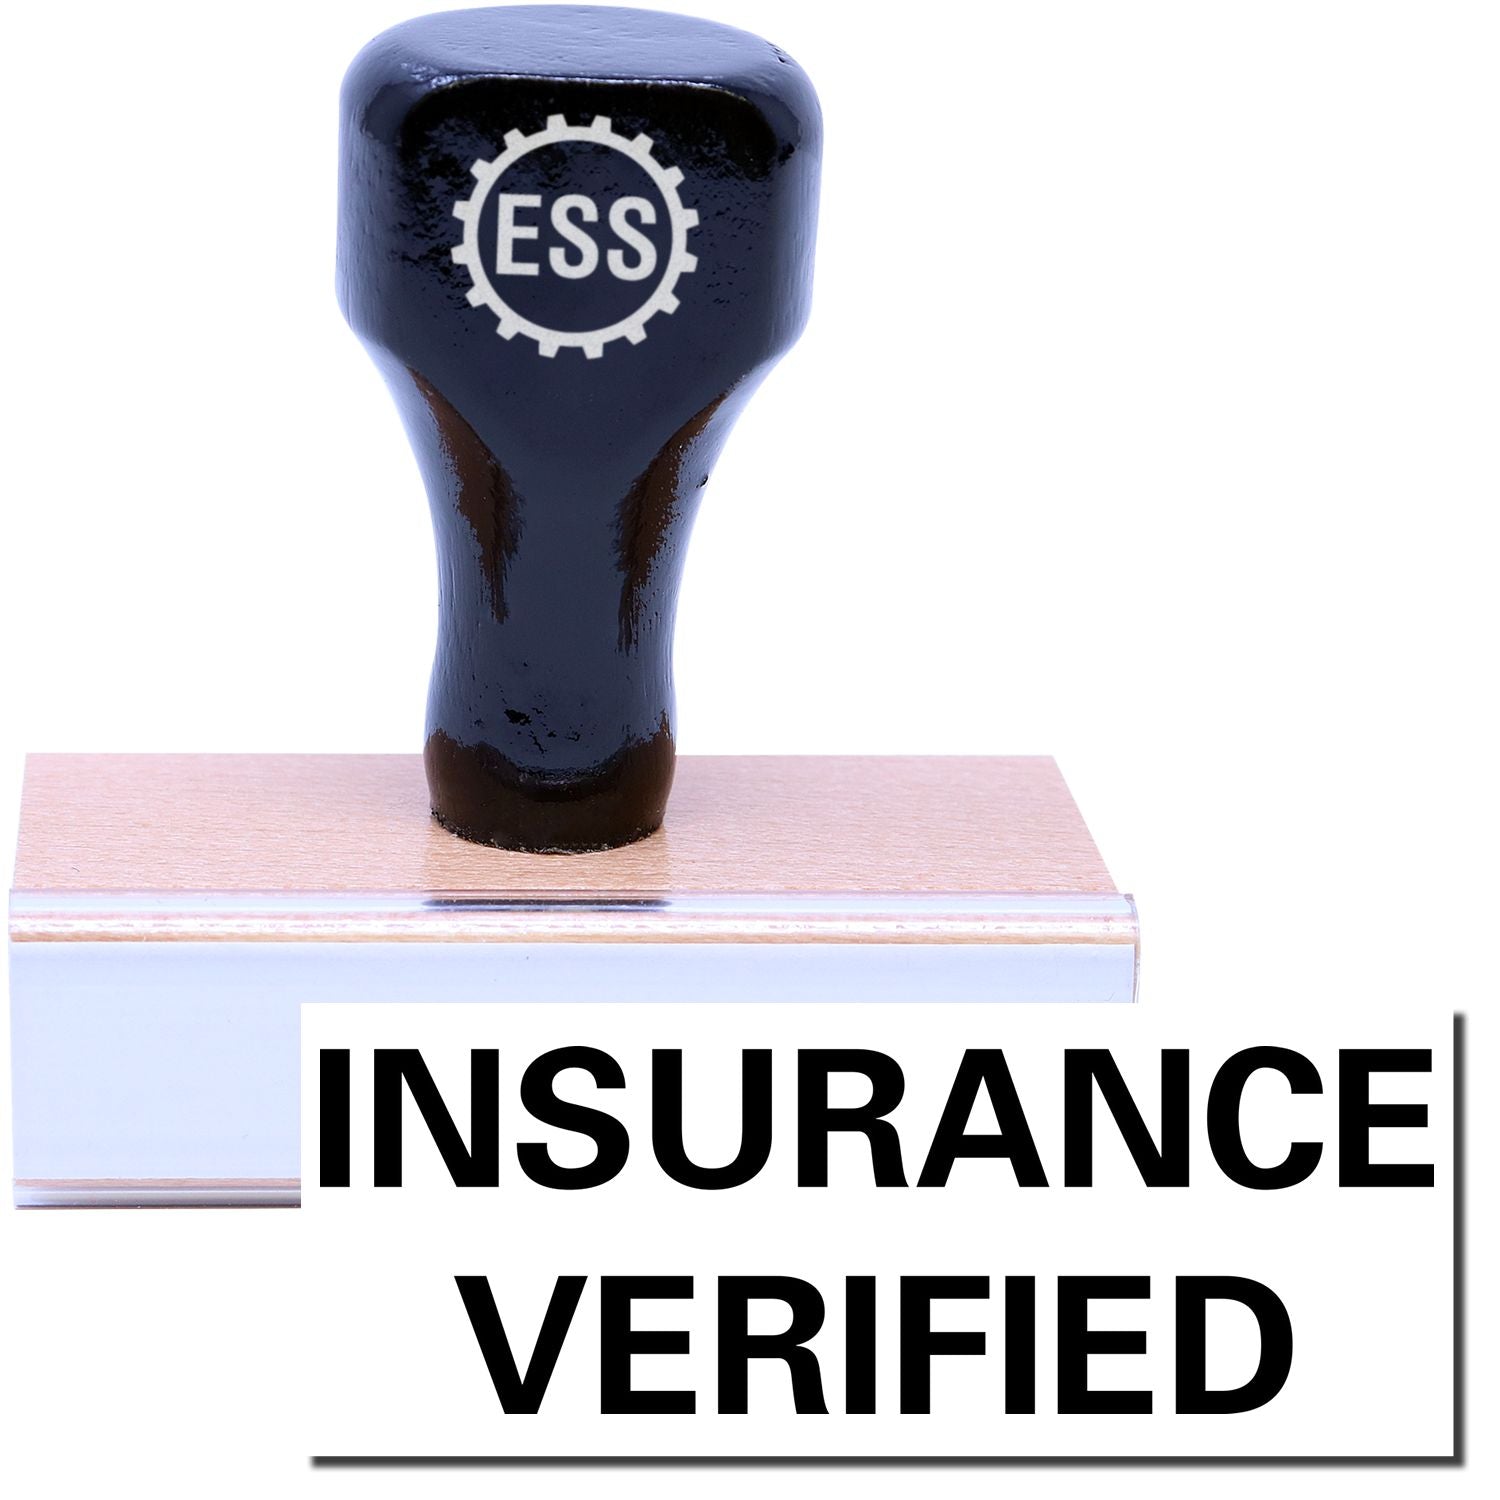 A stock office rubber stamp with a stamped image showing how the text "INSURANCE VERIFIED" in a large font is displayed after stamping.